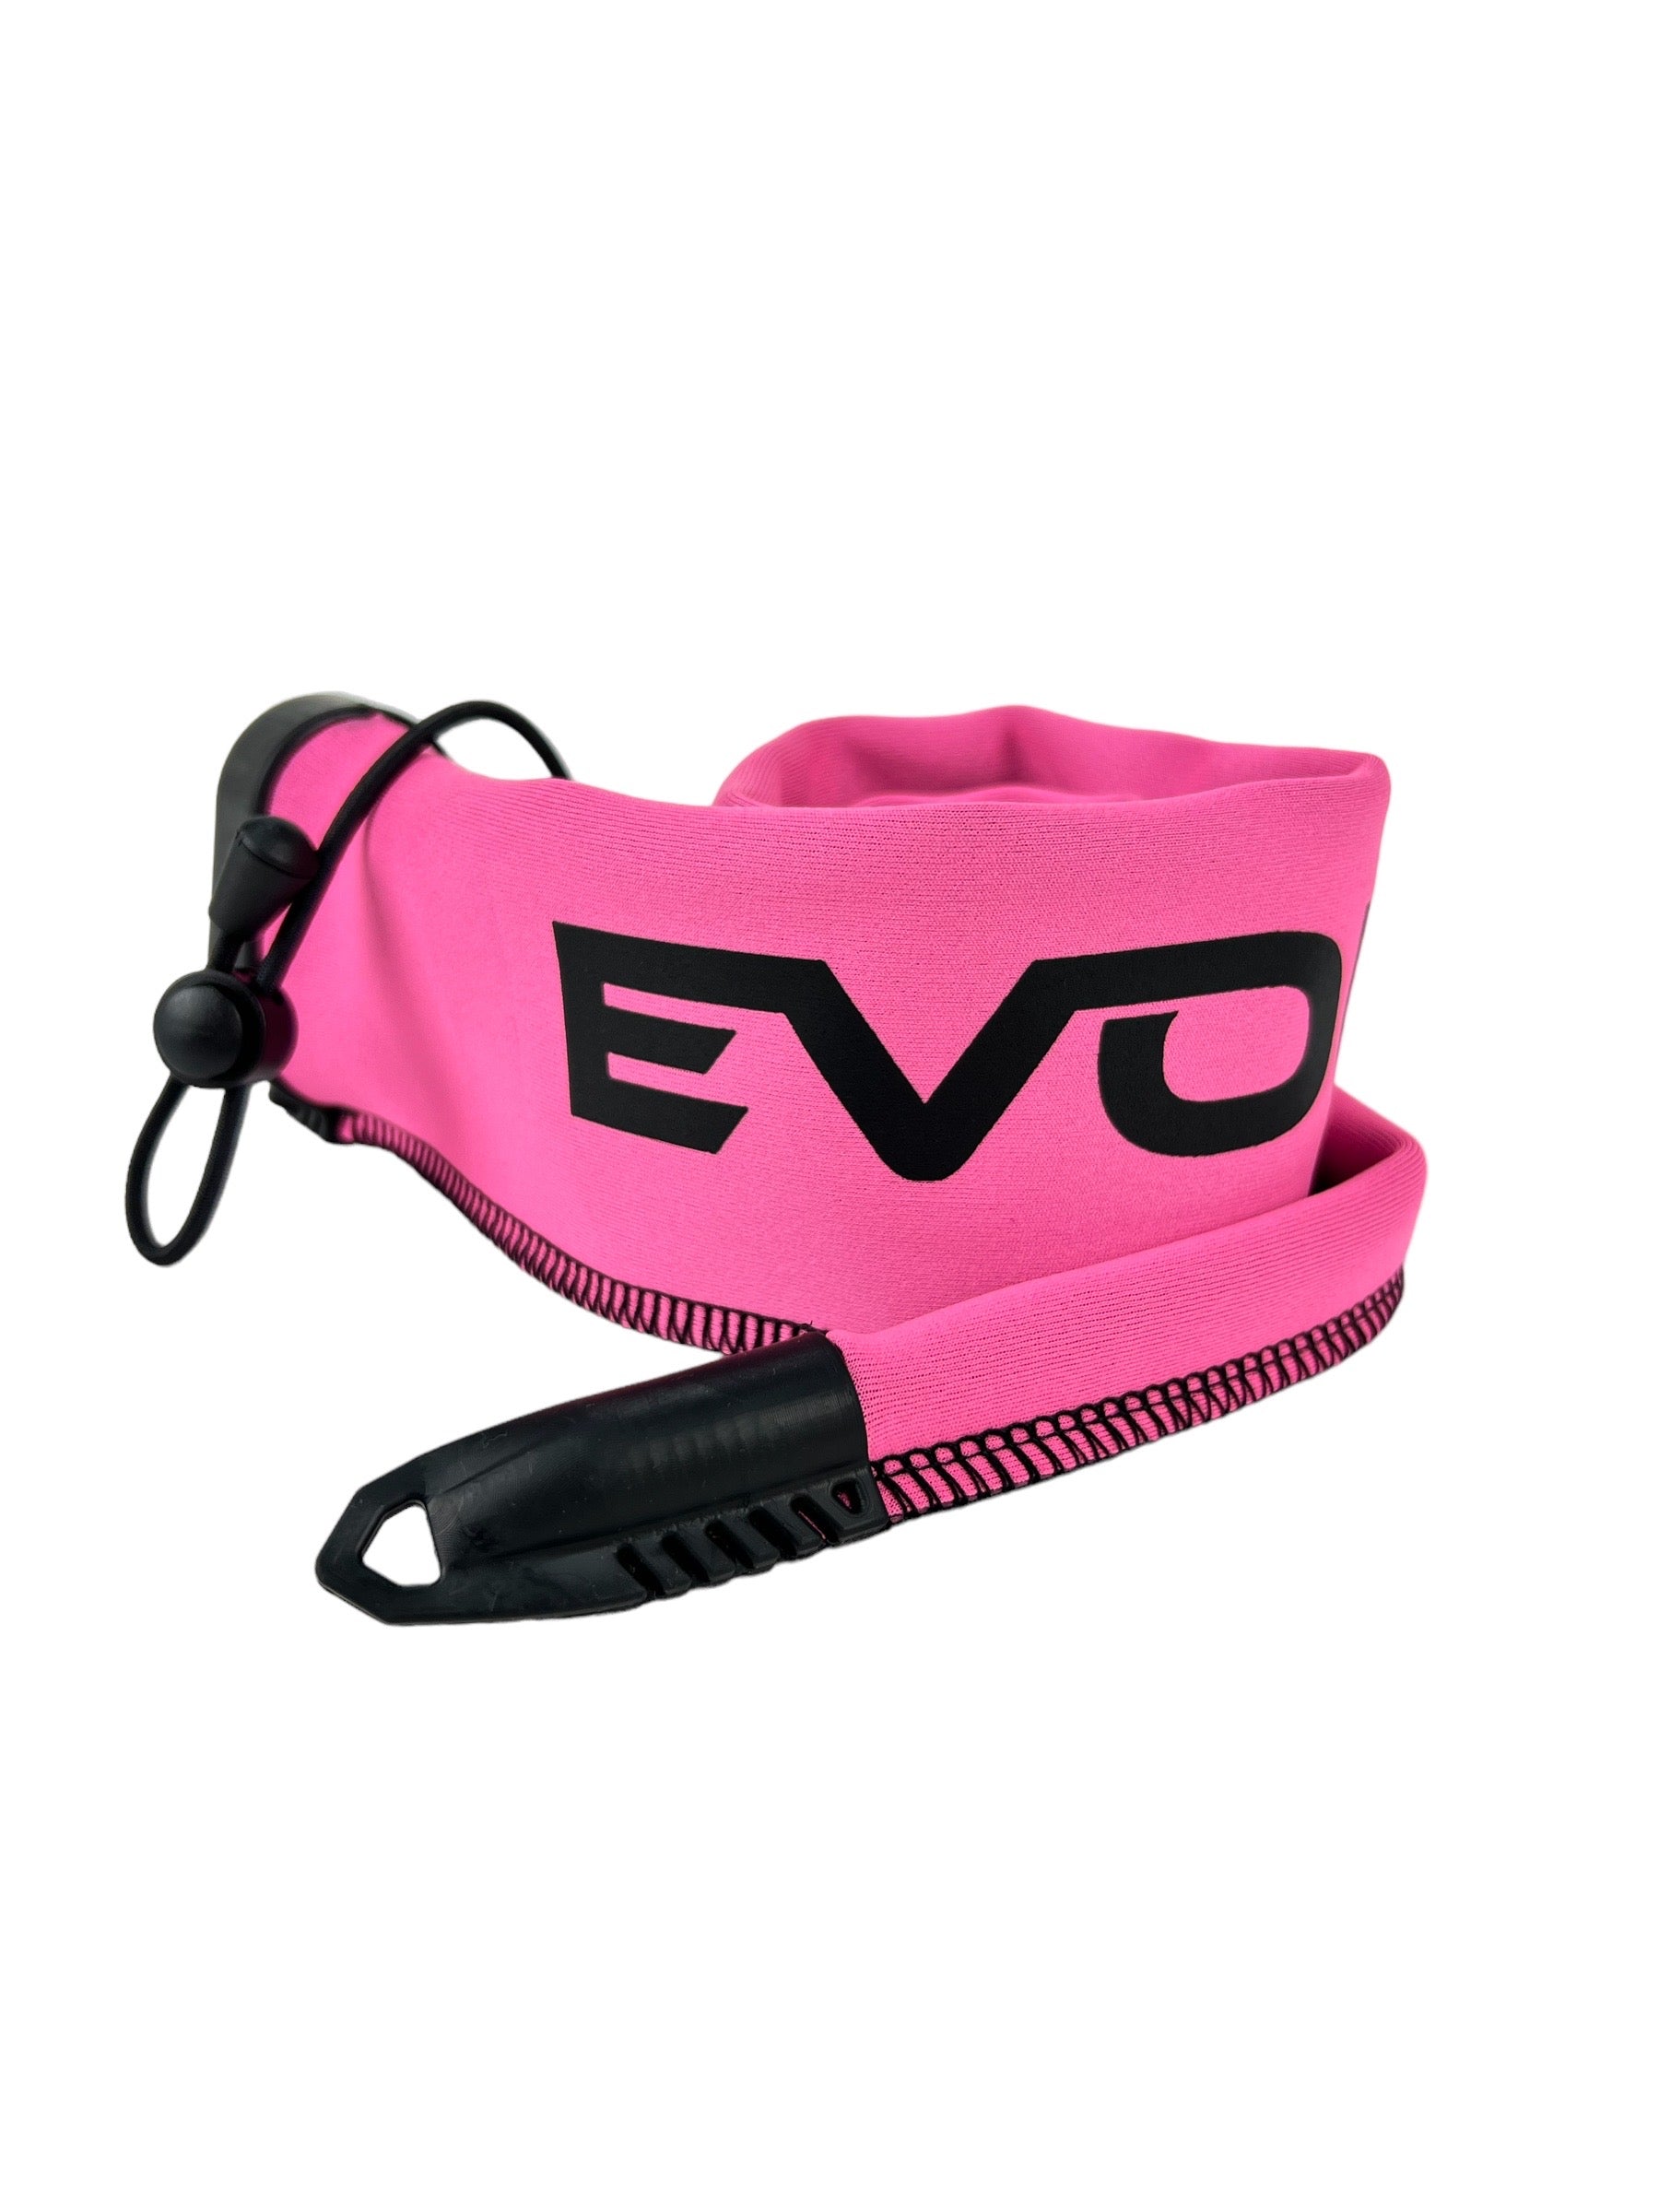 Limited Edition - Spinning Rod Sleeves, EVOLV Fishing